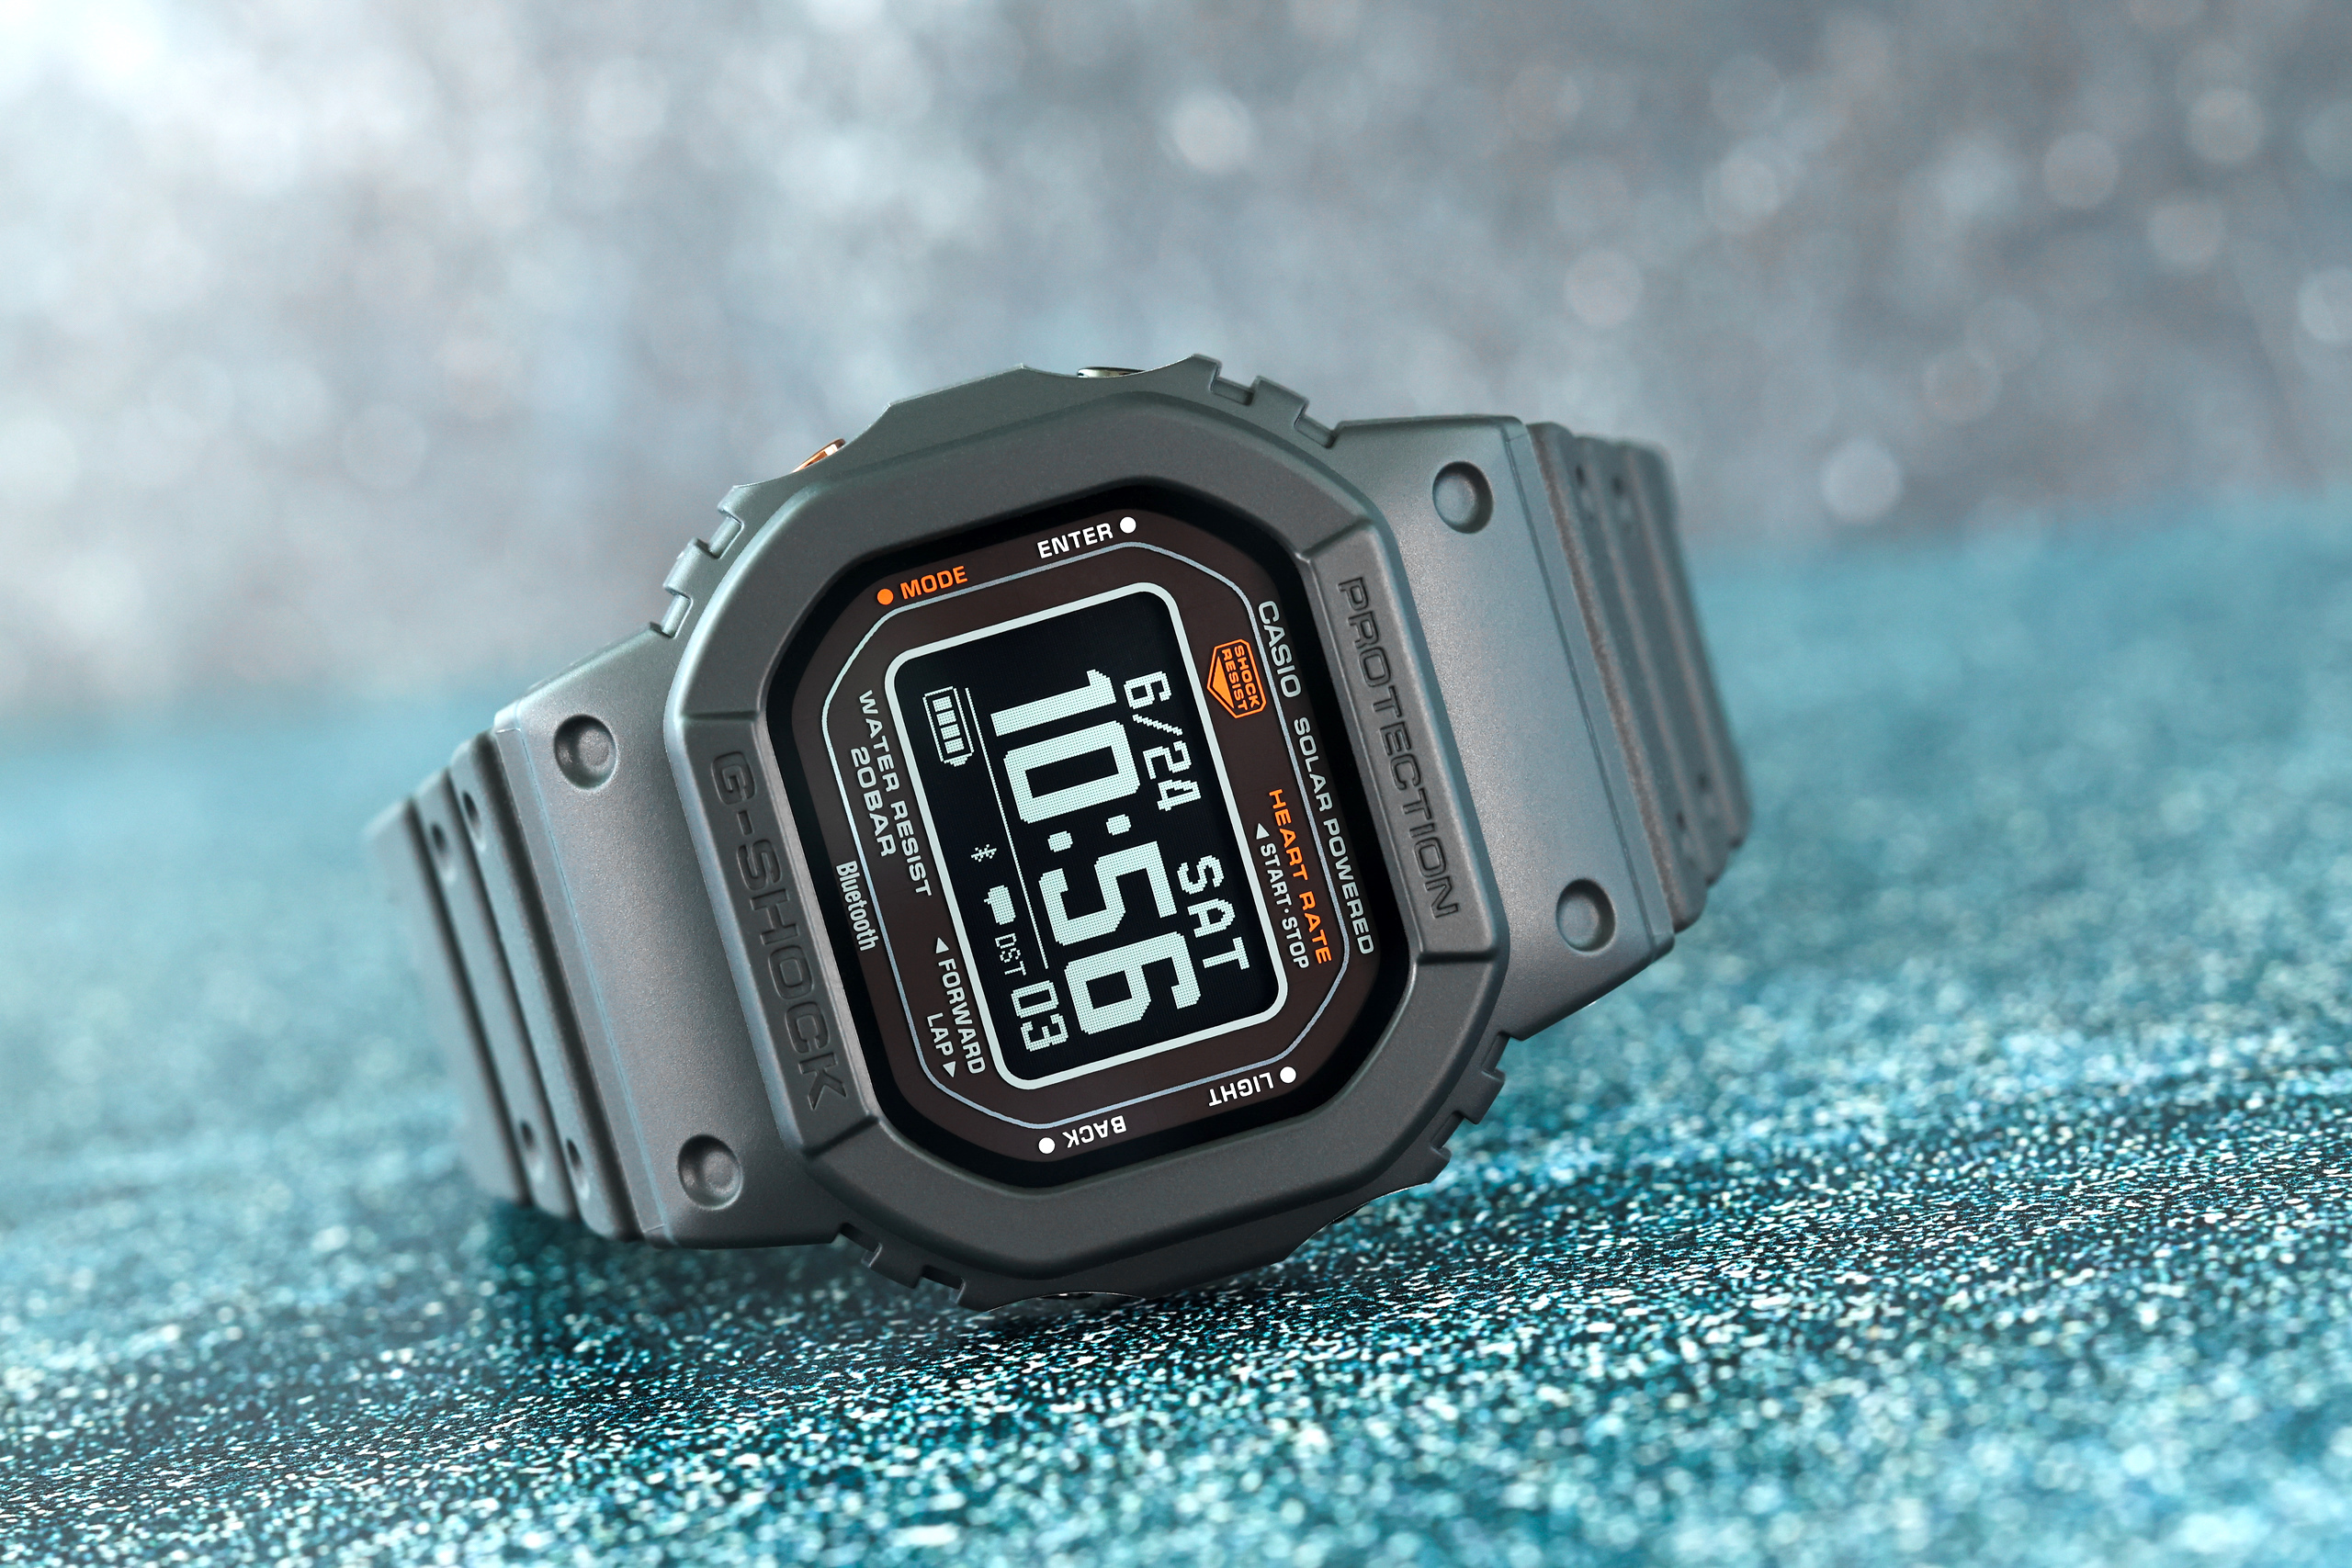 This $15 Casio watch is the perfect antidote to Apple and Garmin